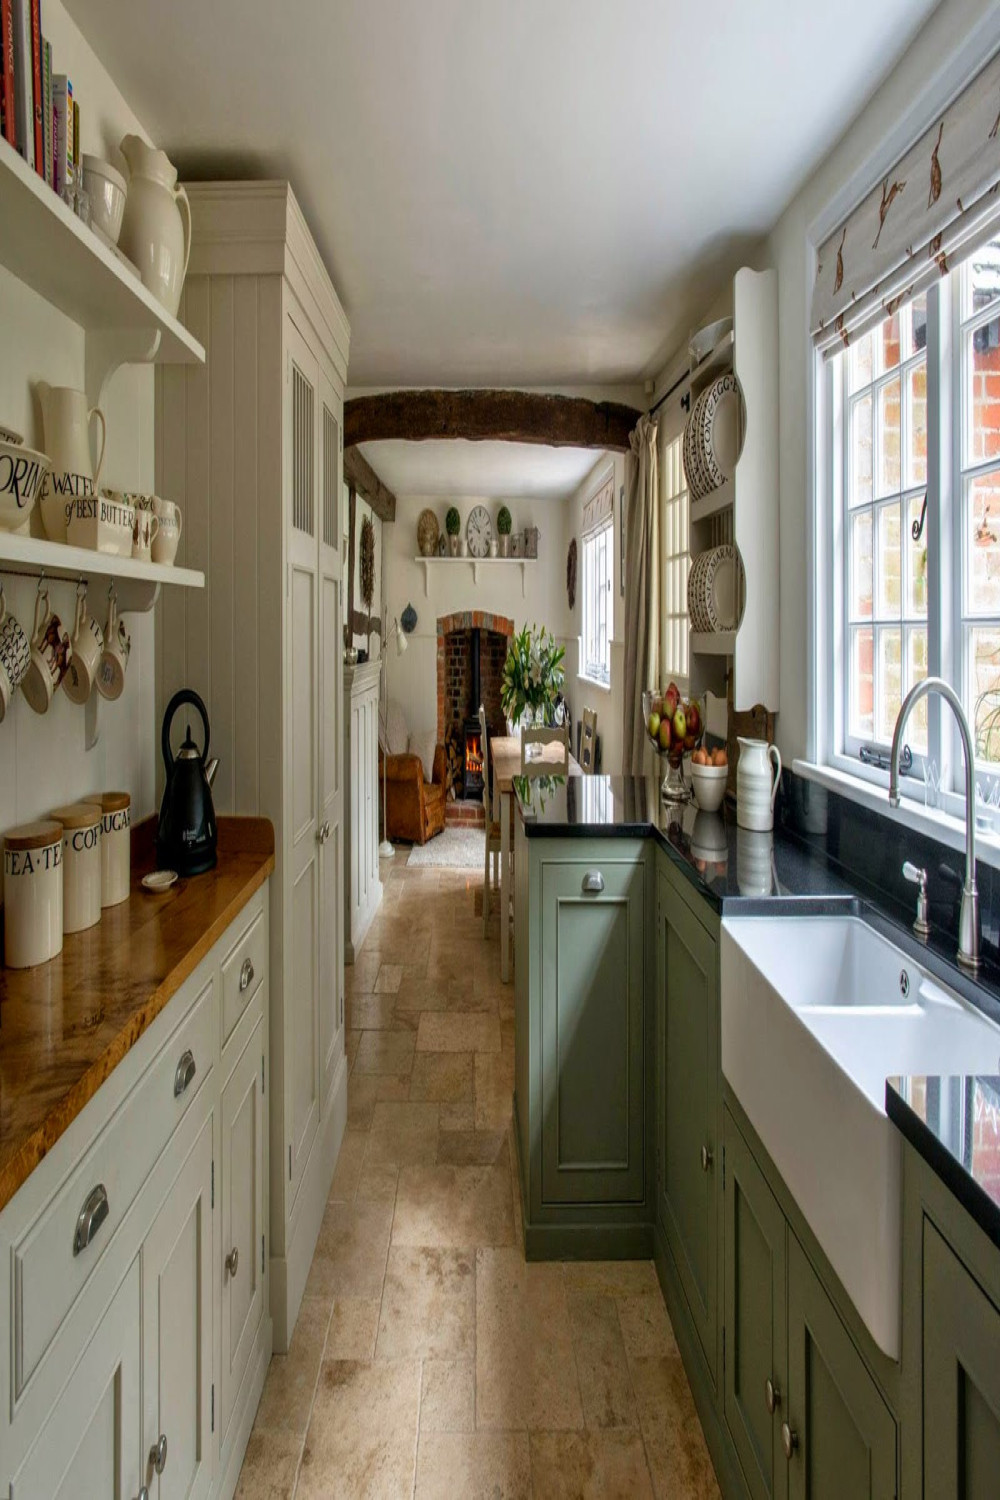 Several Design Ideas For All Country Kitchens